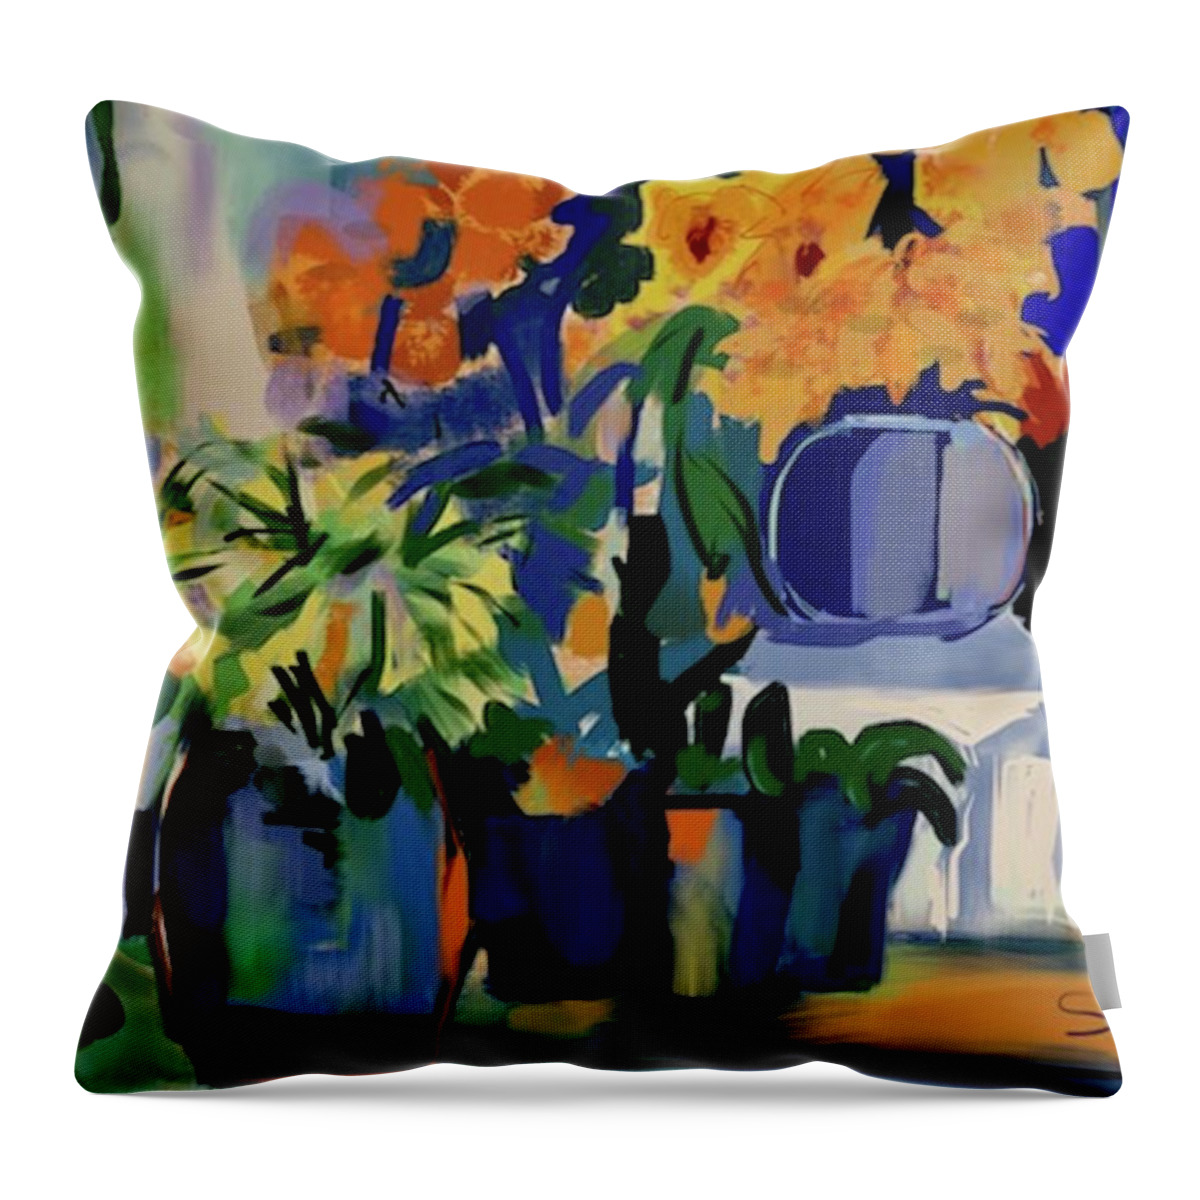 Abstract Throw Pillow featuring the digital art Floral Abstract by Sherry Killam